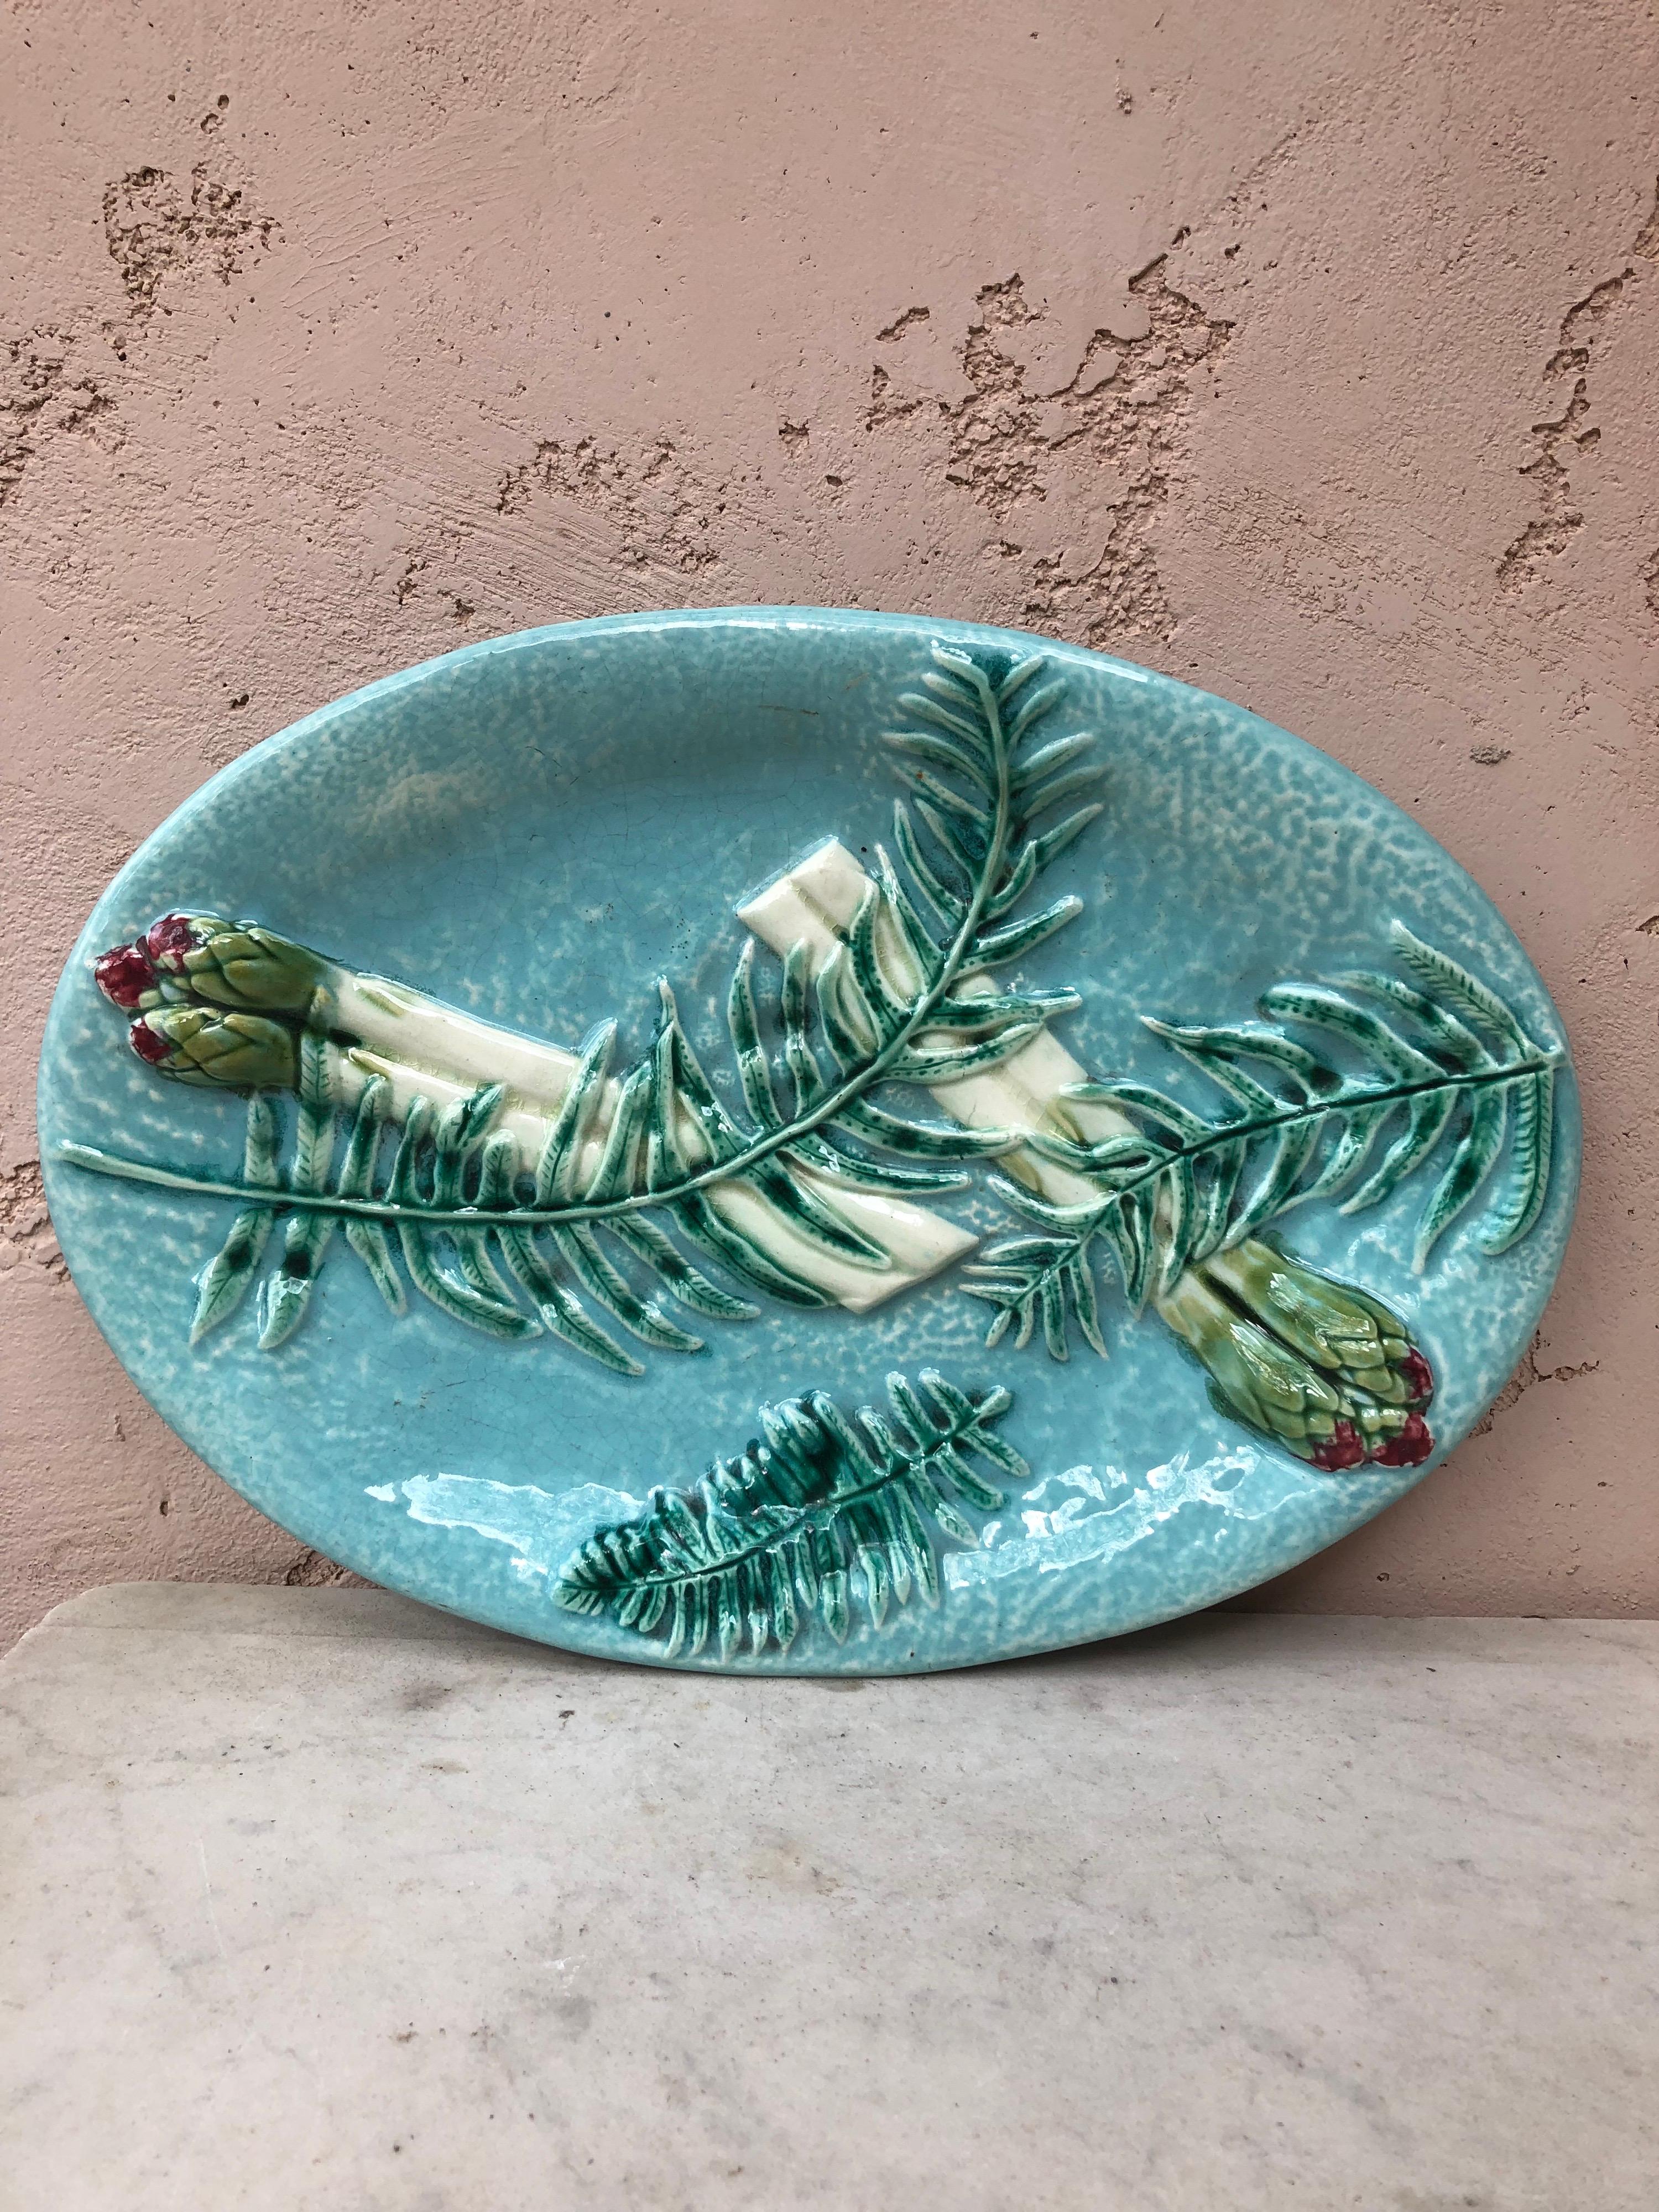 Rare Majolica Asparagus Platter with Fern Clairefontaine, circa 1880 For Sale 4